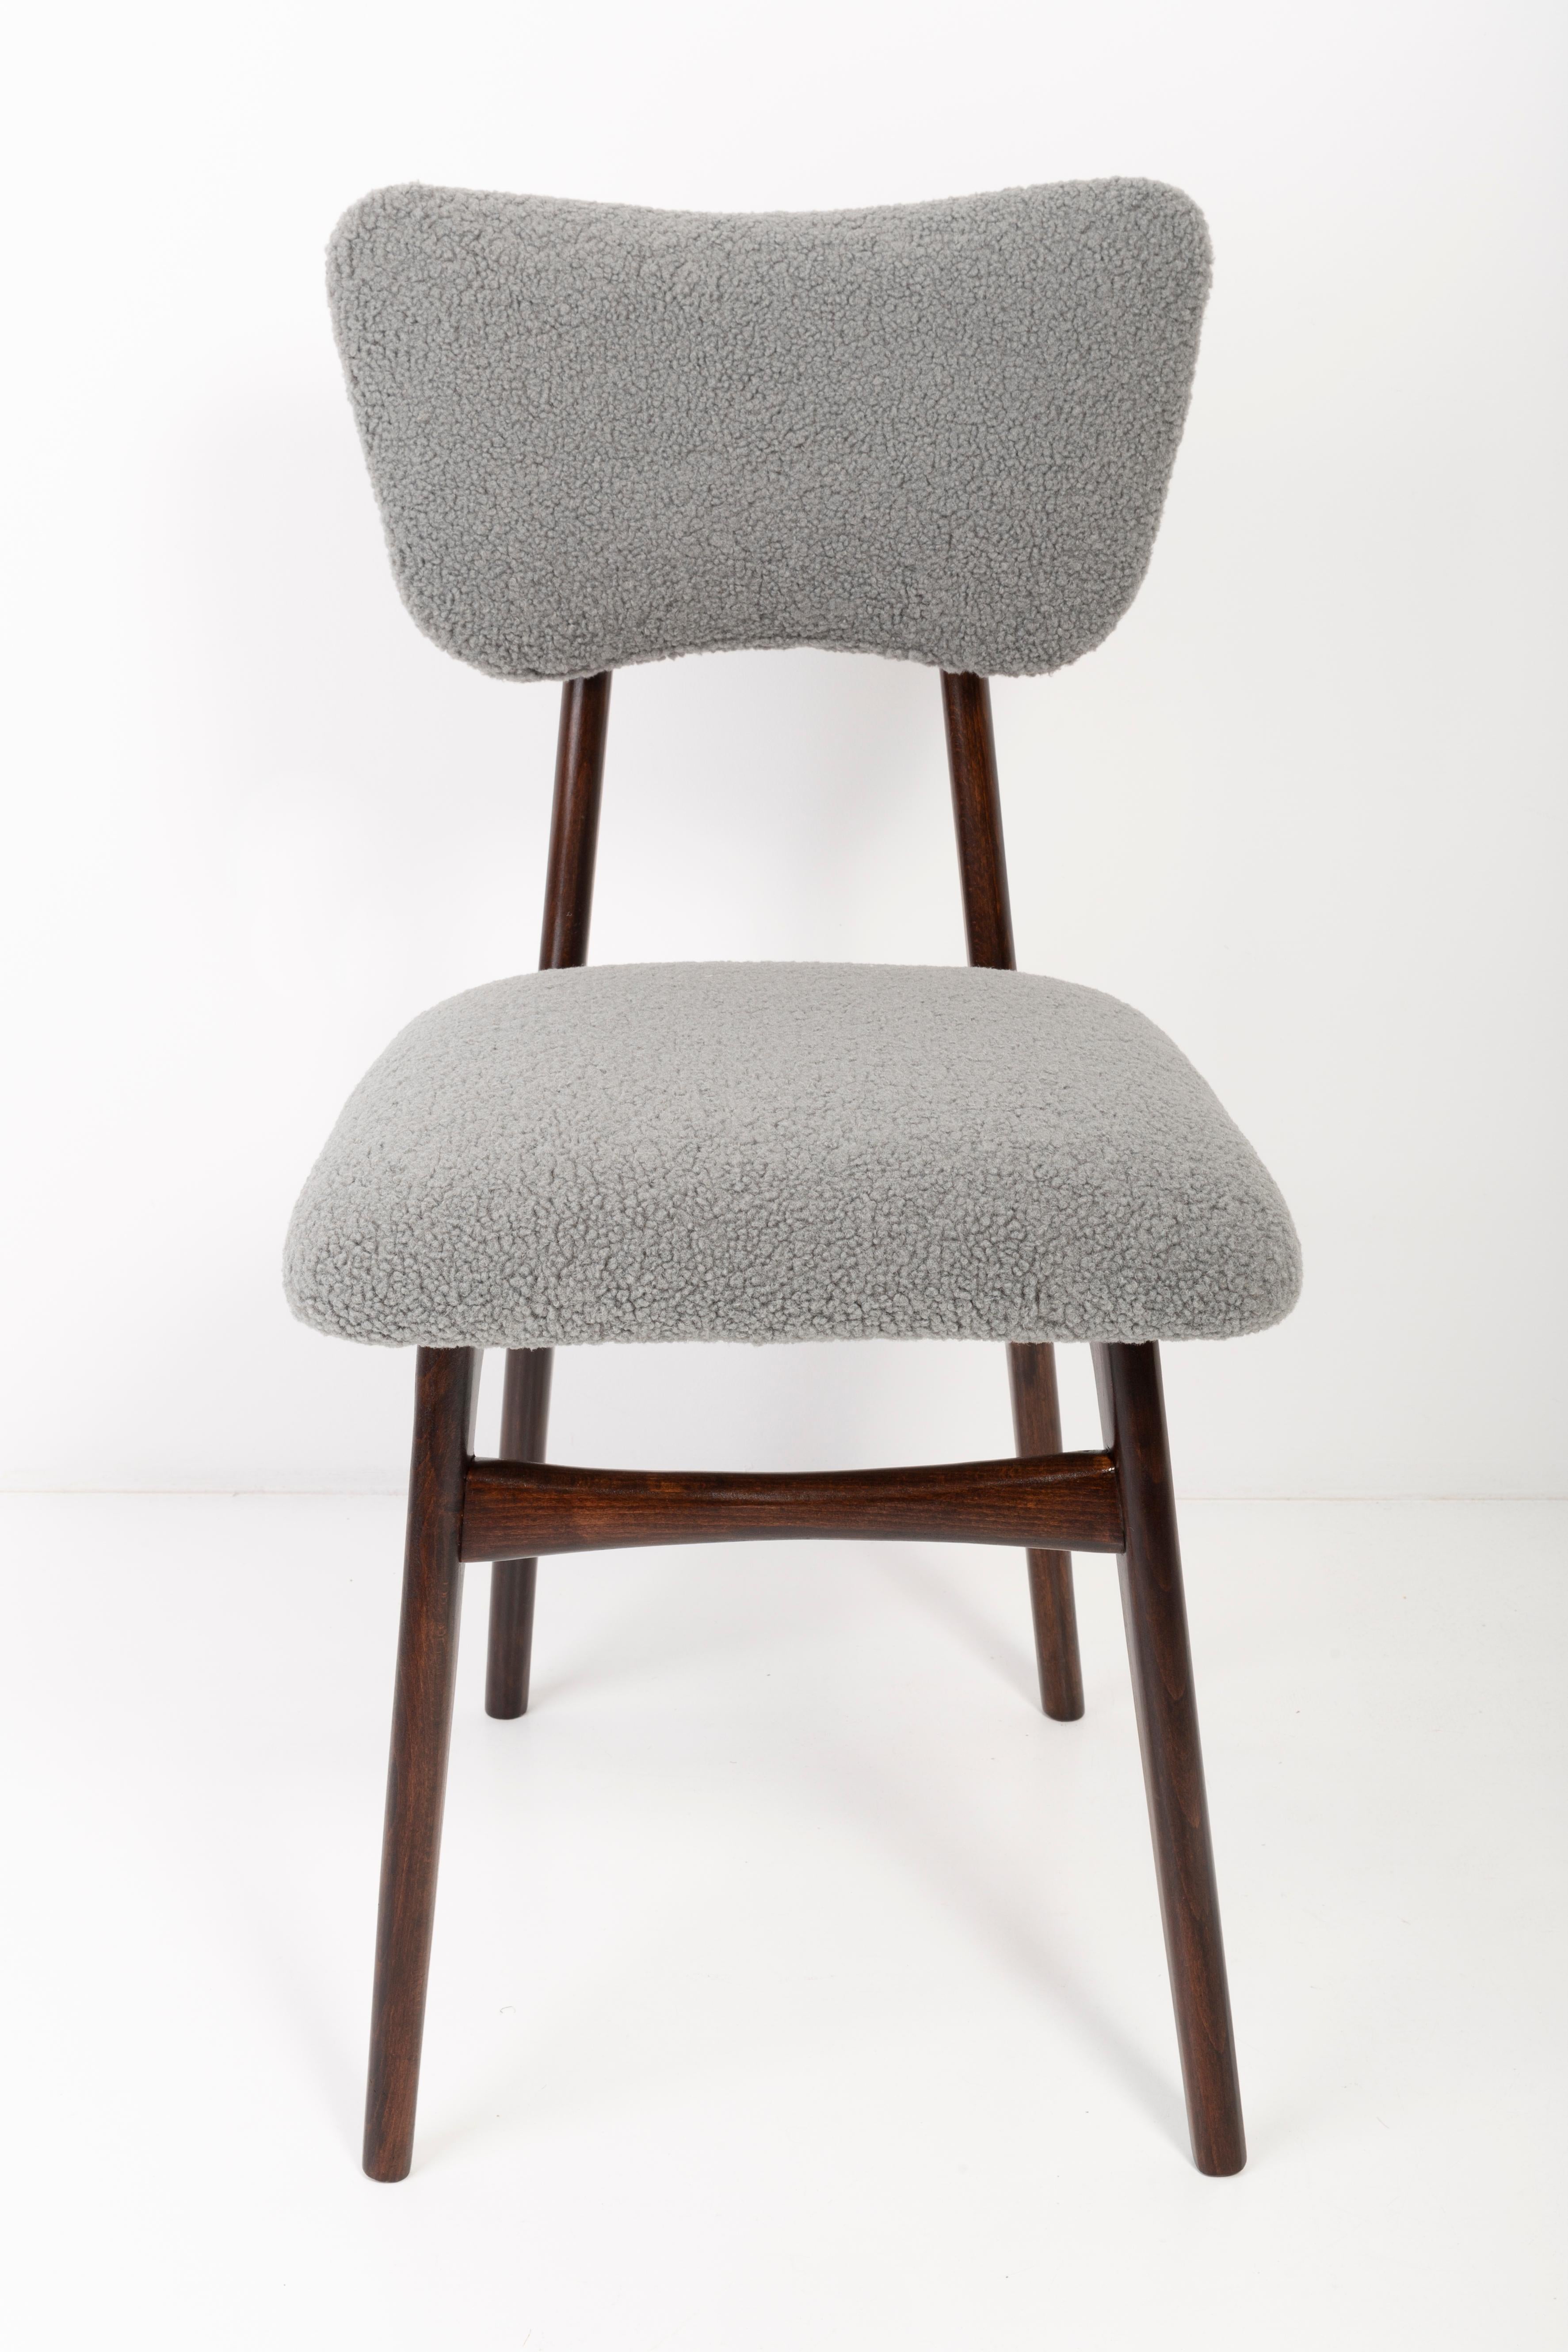 Set of Four 20th Century Gray Boucle Chairs, 1960s For Sale 5